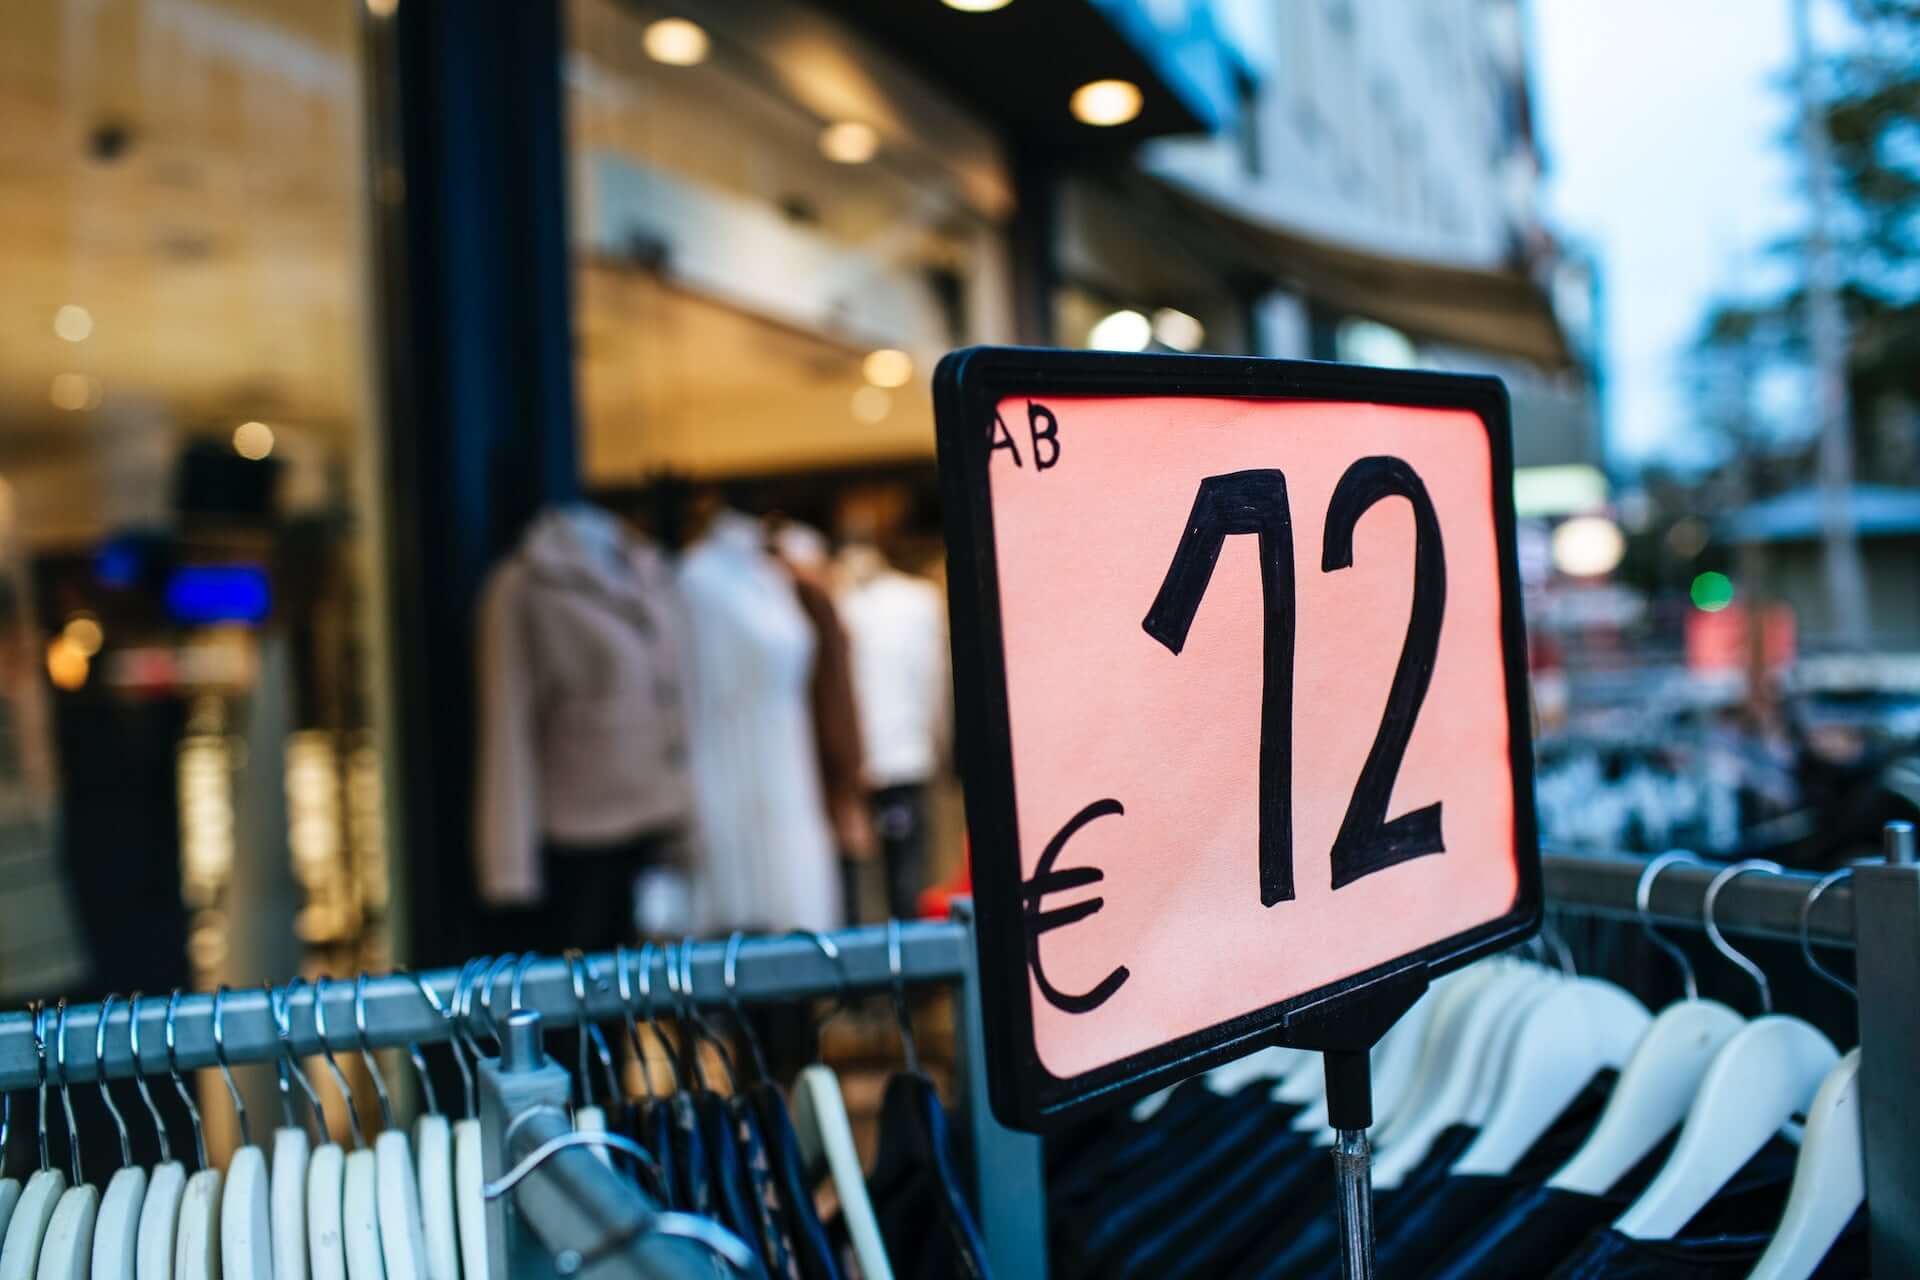 A sign for 12 euro clothing outside of a store.